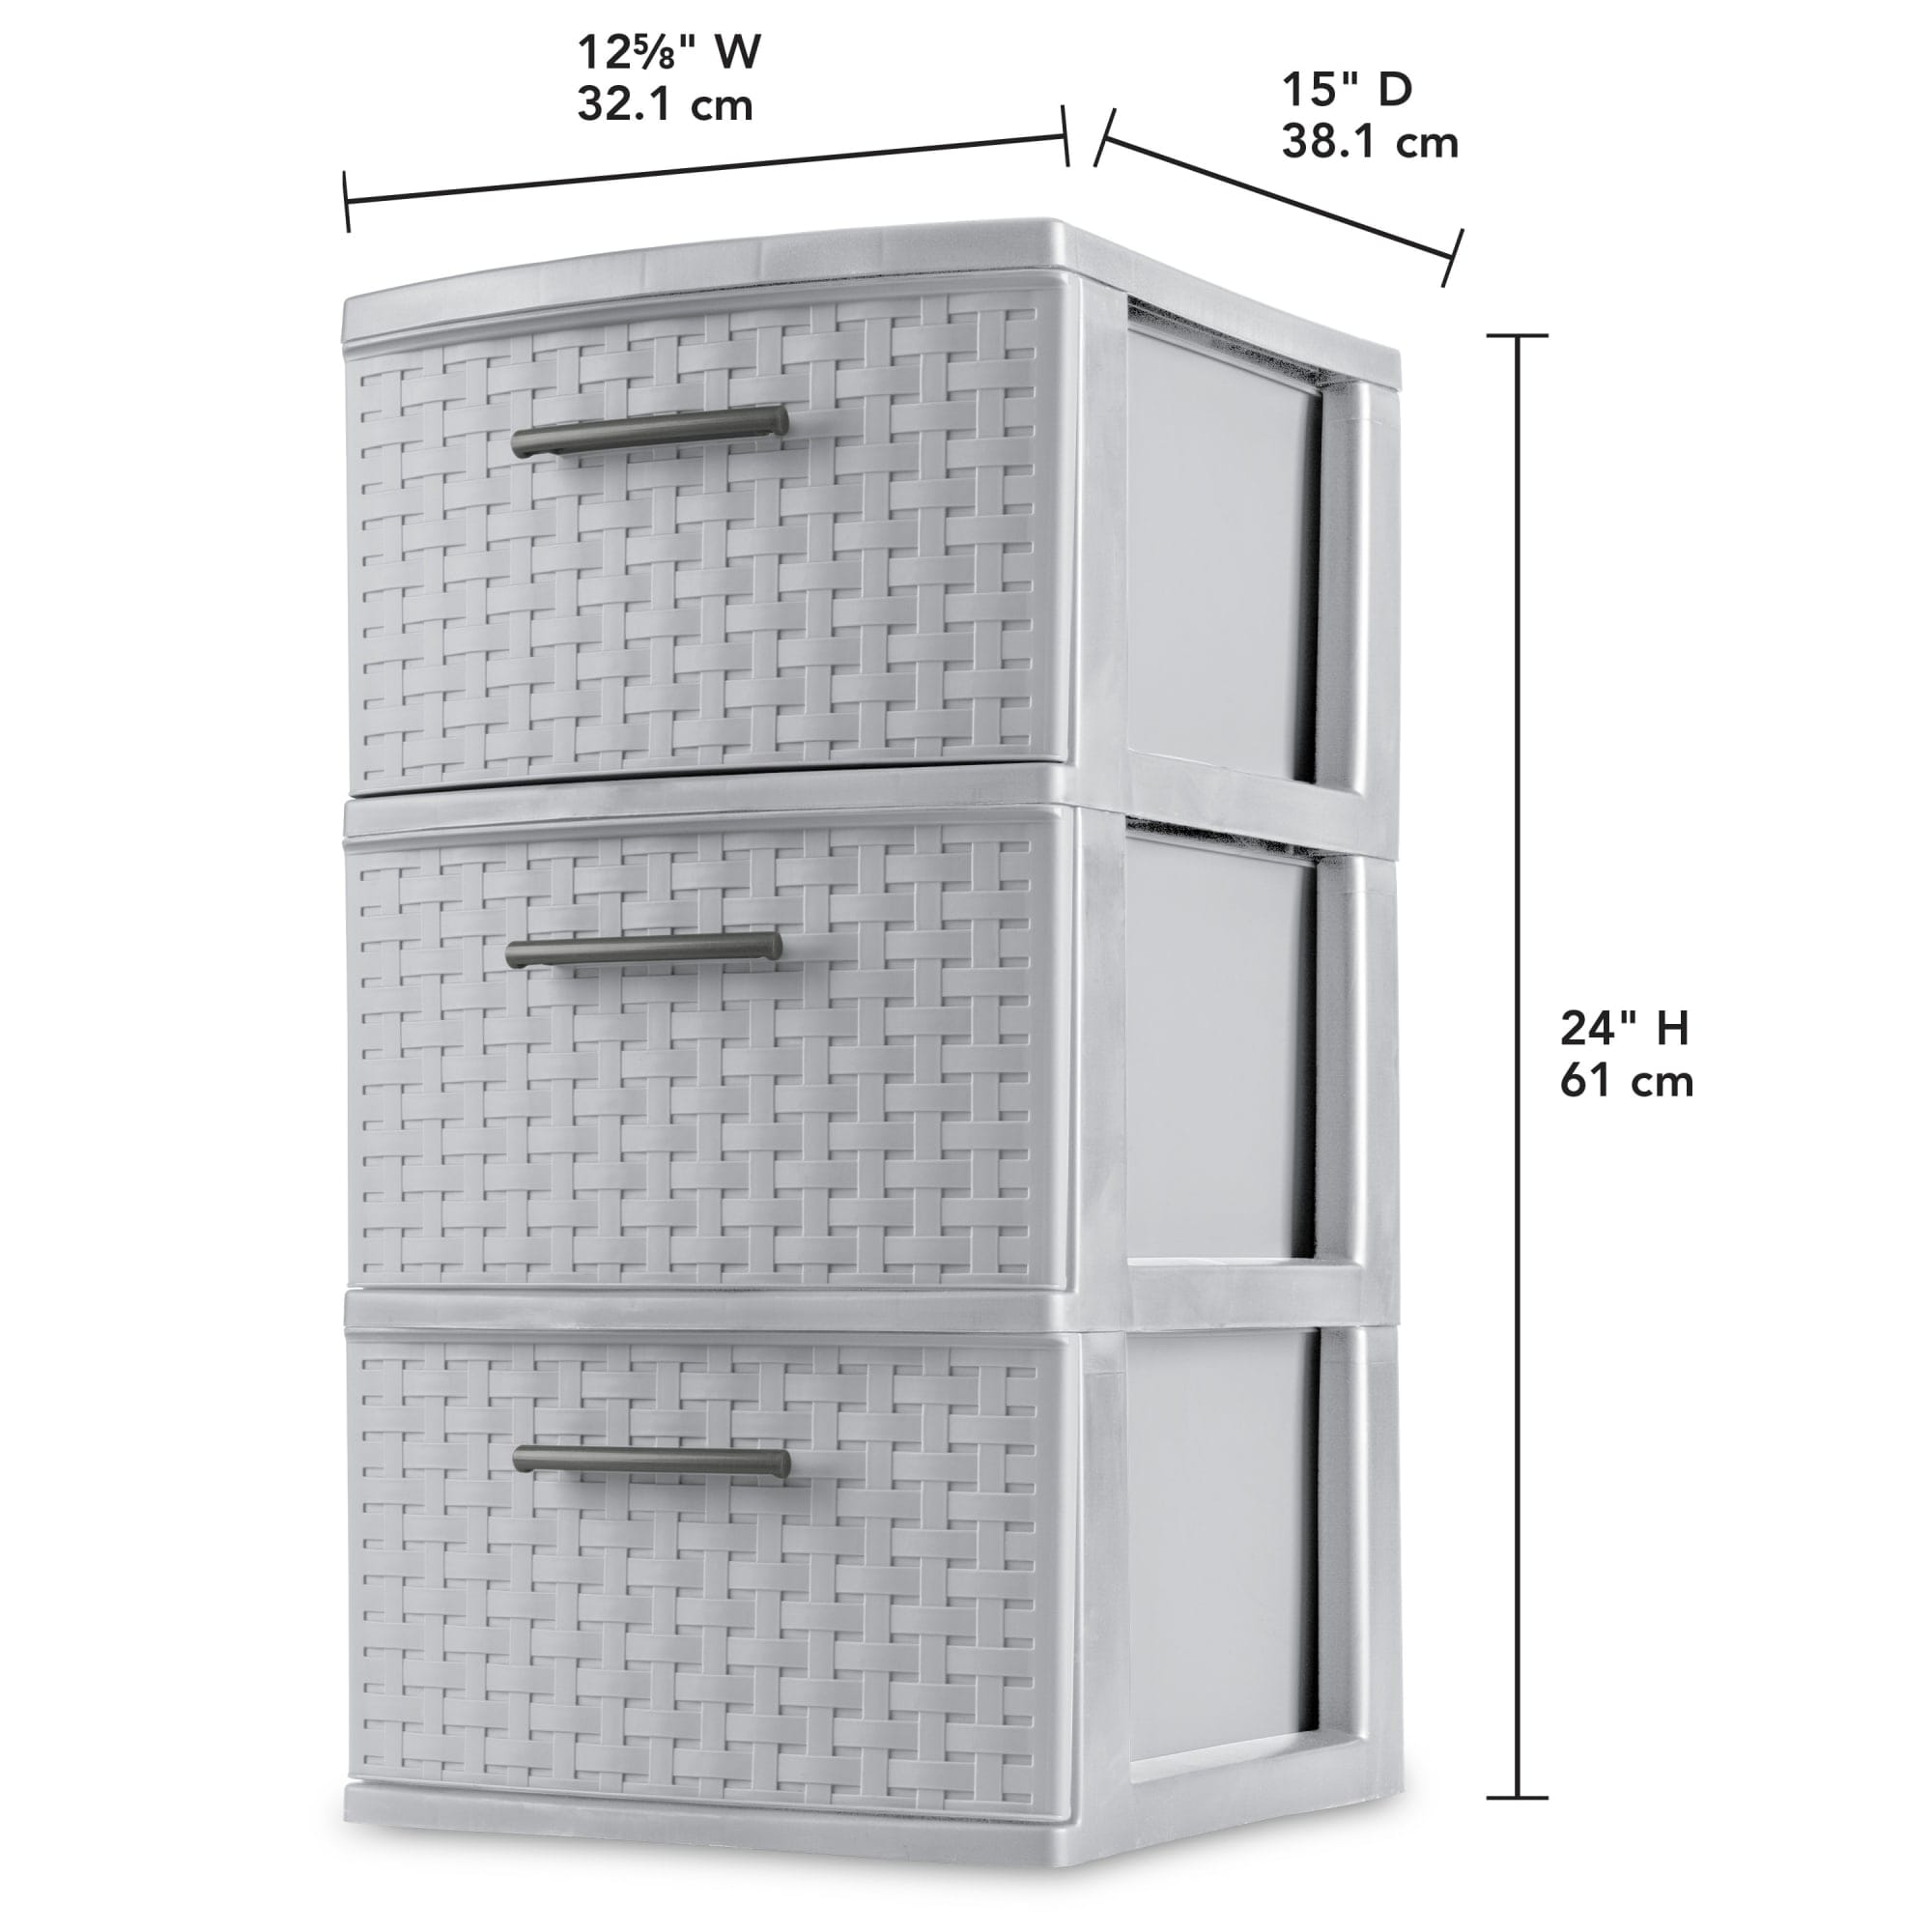 Sterilite 3 Drawer Weave Tower, Cement $32.00 EACH, CASE PACK OF 2